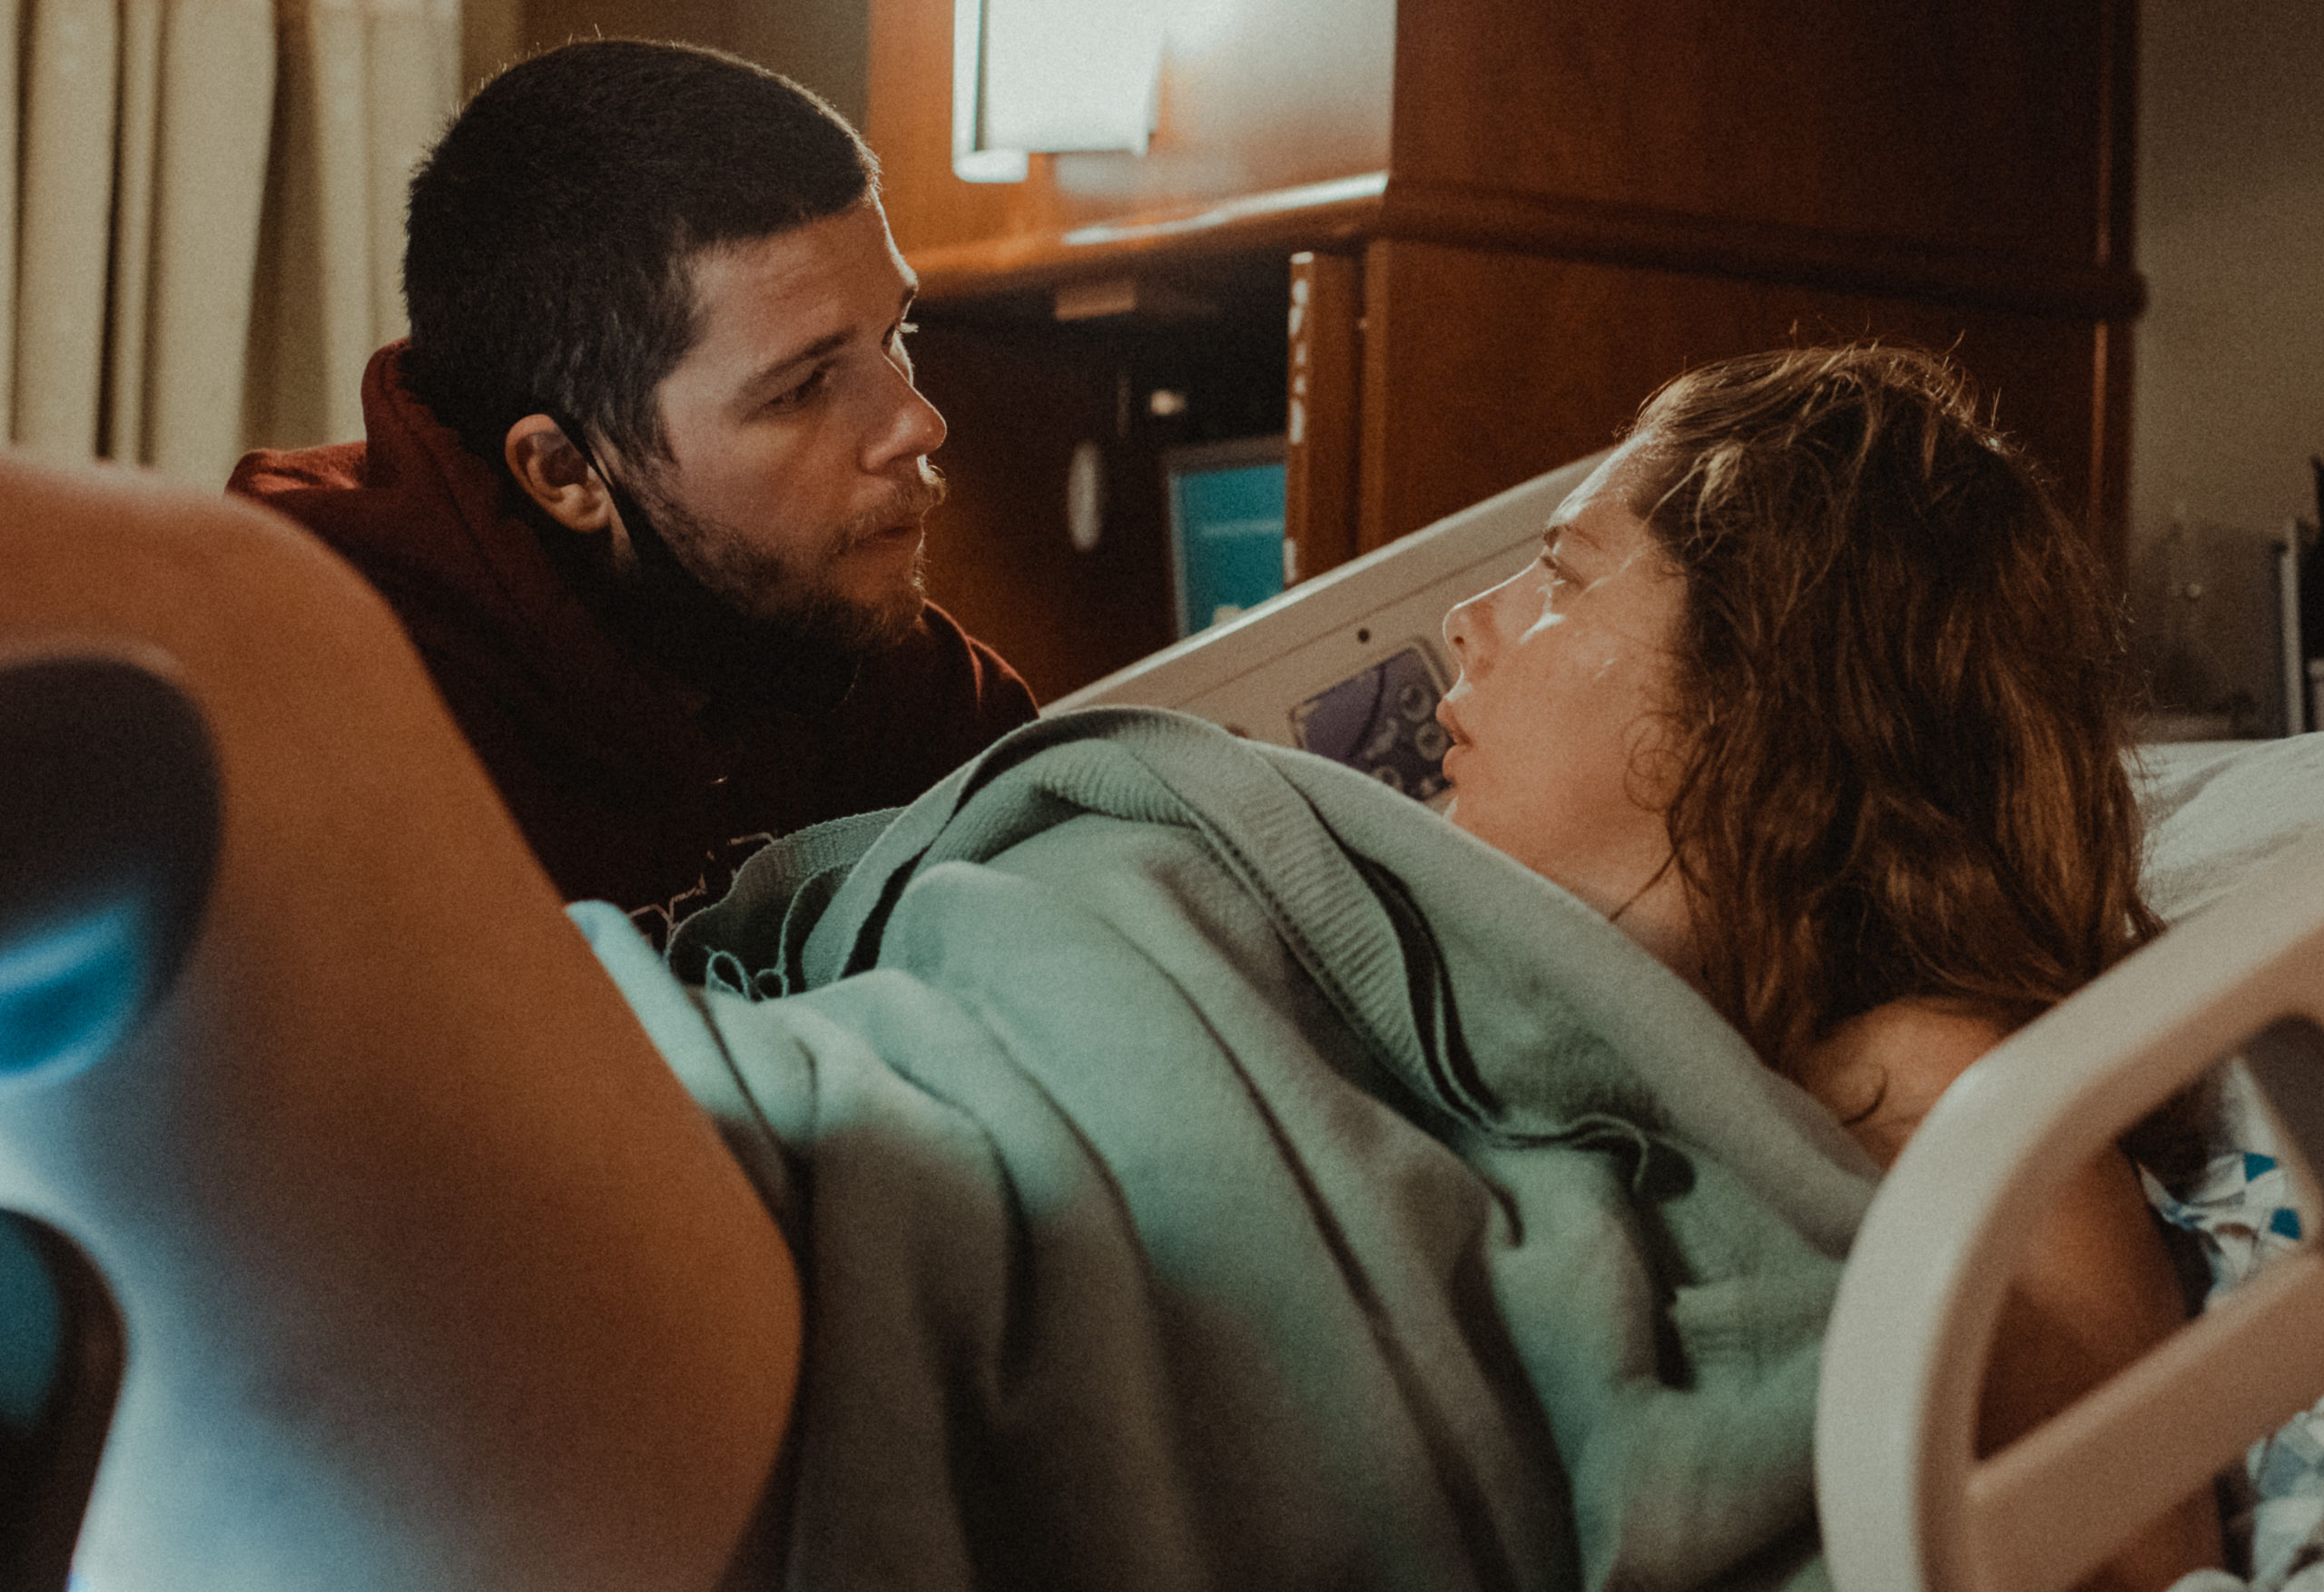 A husband helps his wife breathe during birth in a hospital meredith mccann photography